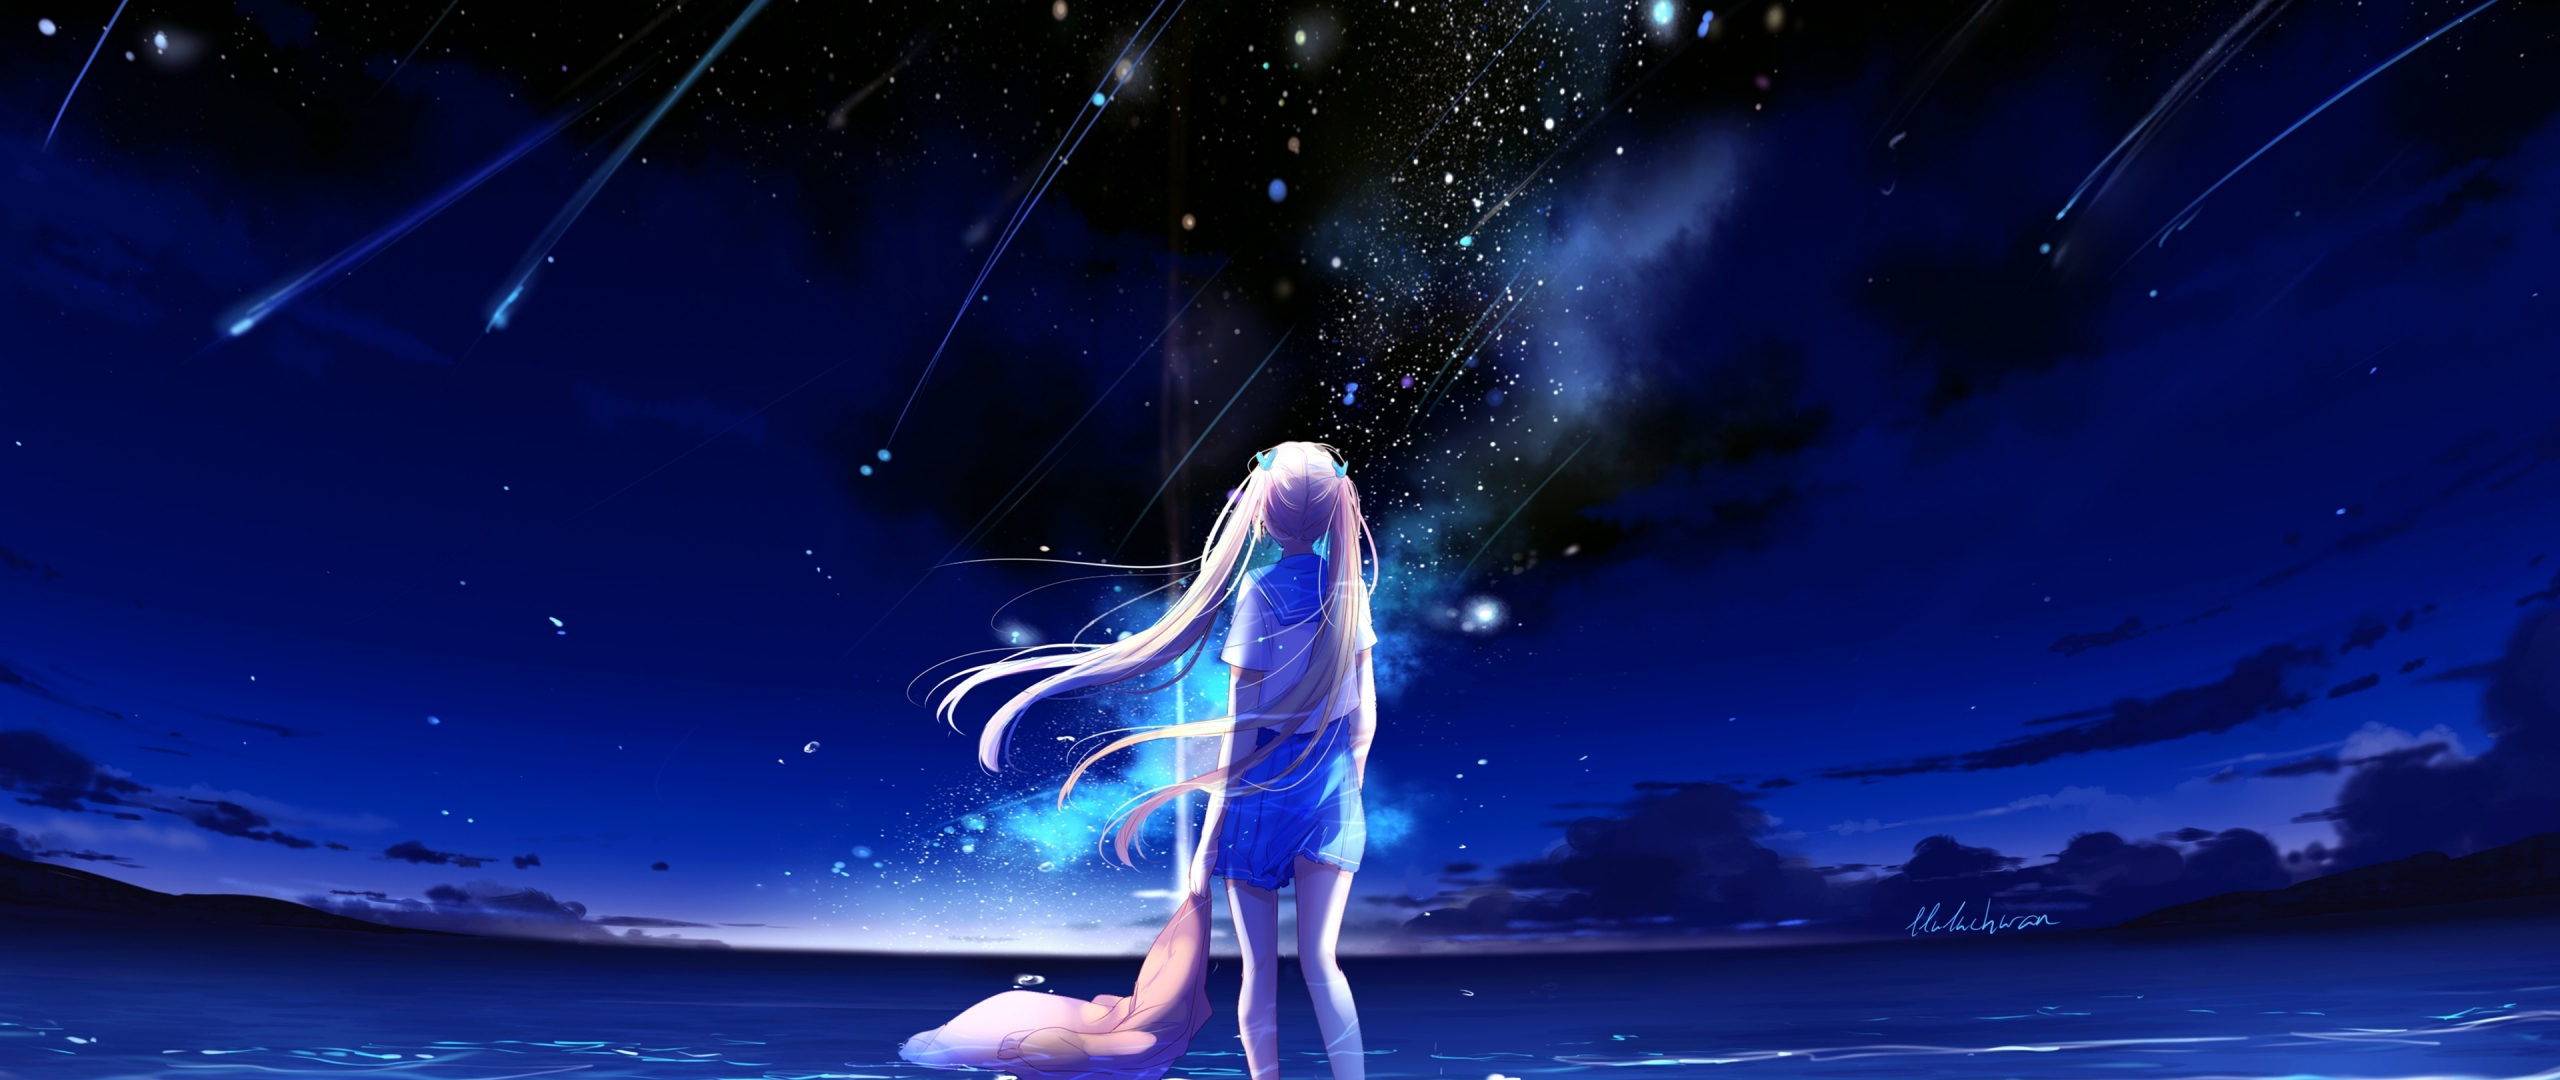 Download anime girl, outdoor, night, starfall 2560x1080 wallpaper, dual wide 2560x1080 HD image, background, 5622